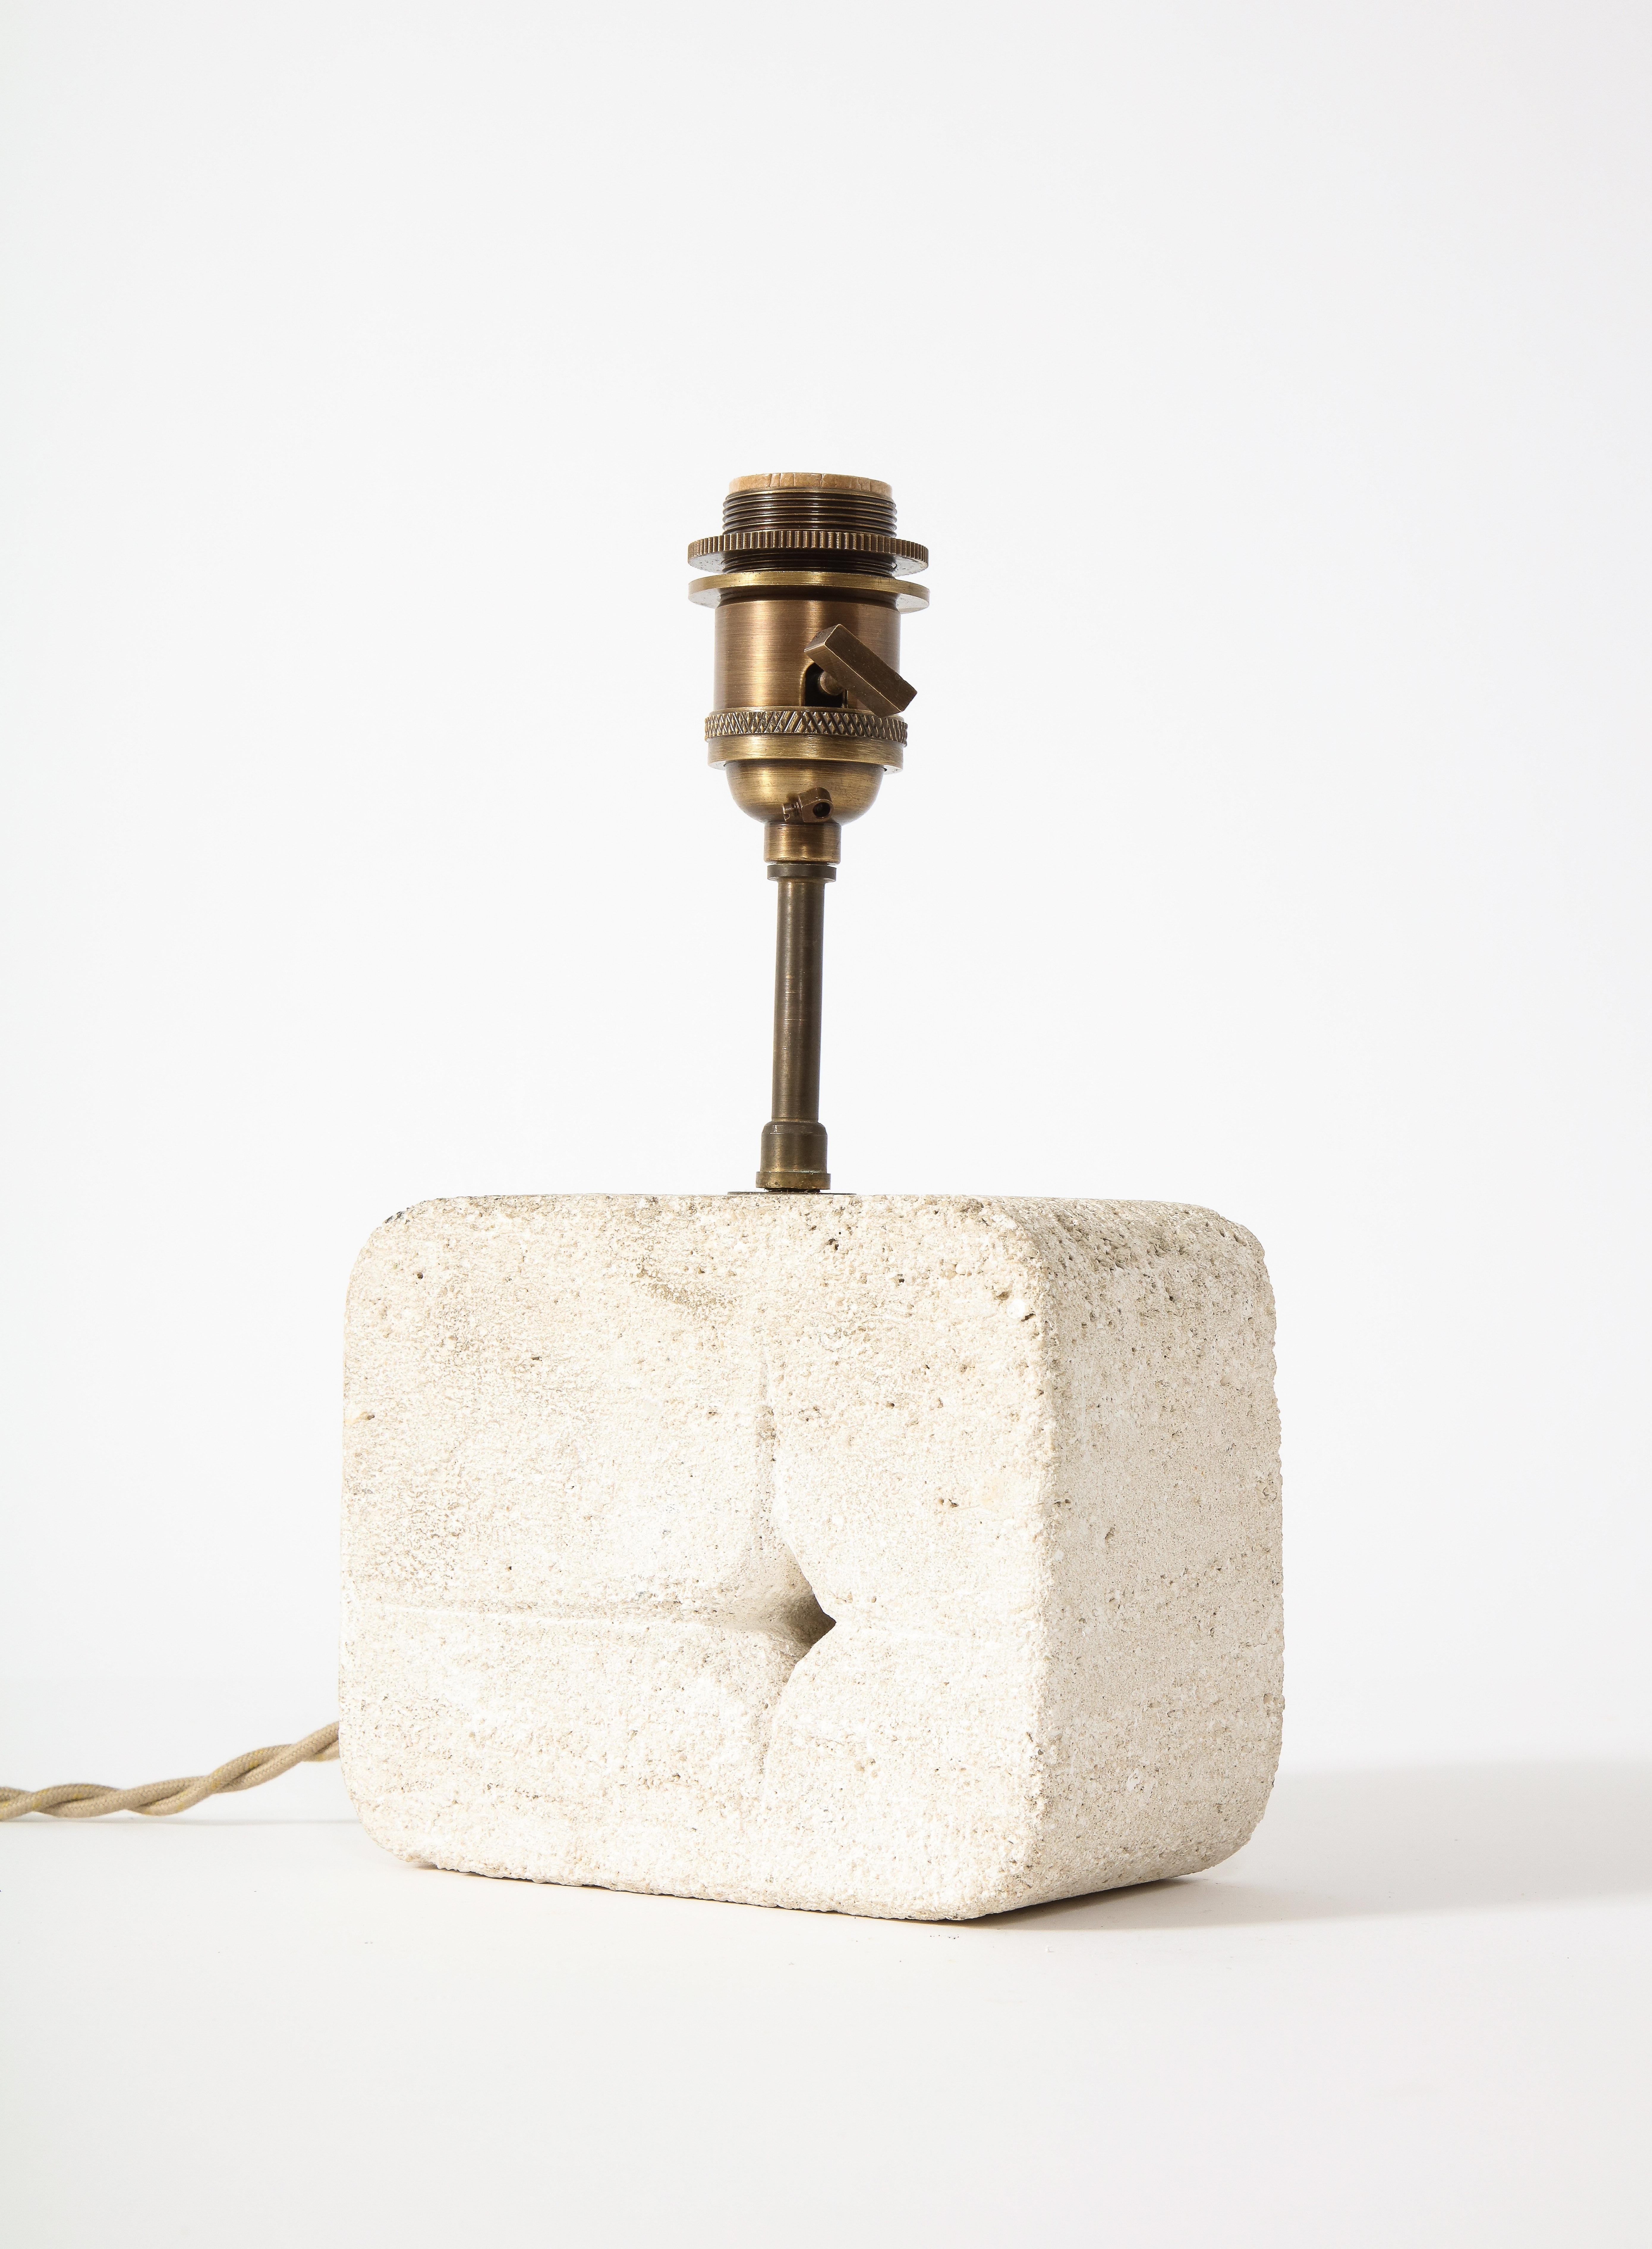 Hand-Carved Tormos Small Limestone Table Lamp with Perforation Detail, France 1960's For Sale